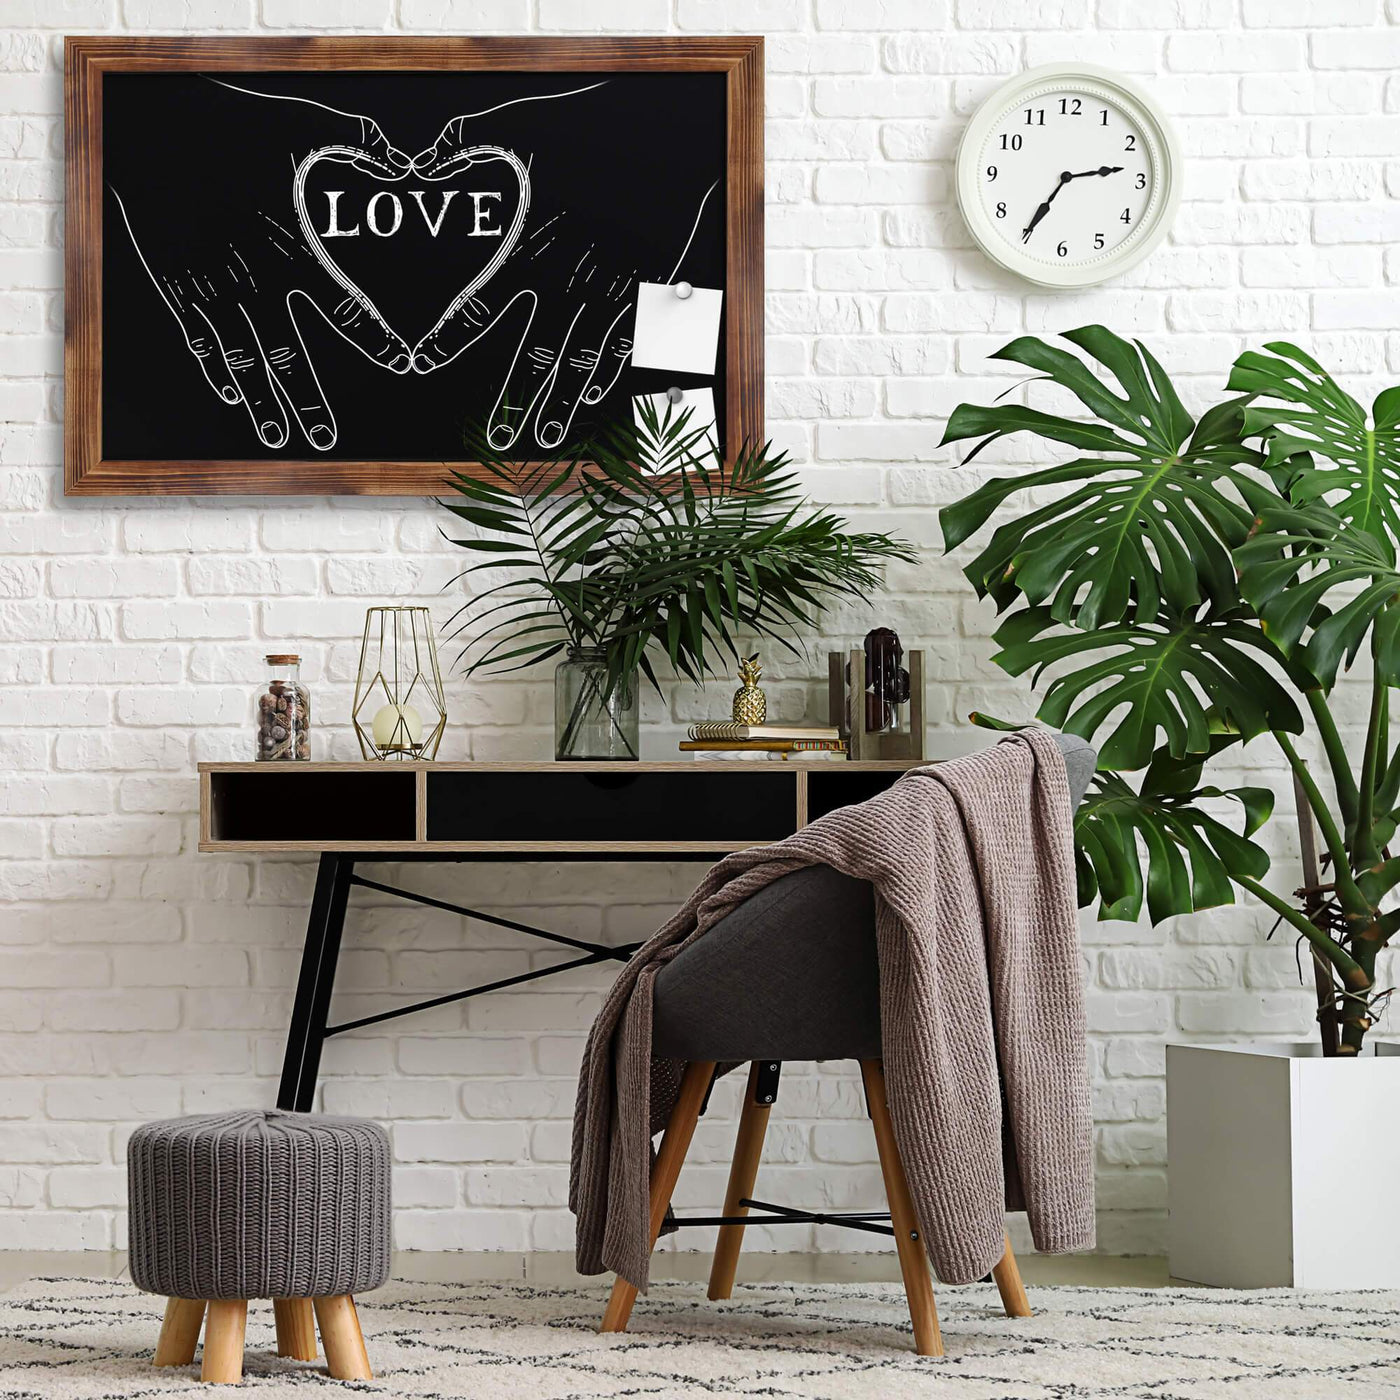 24" x 36" Rustic Magnetic Wall Chalkboard - EXTRA LARGE